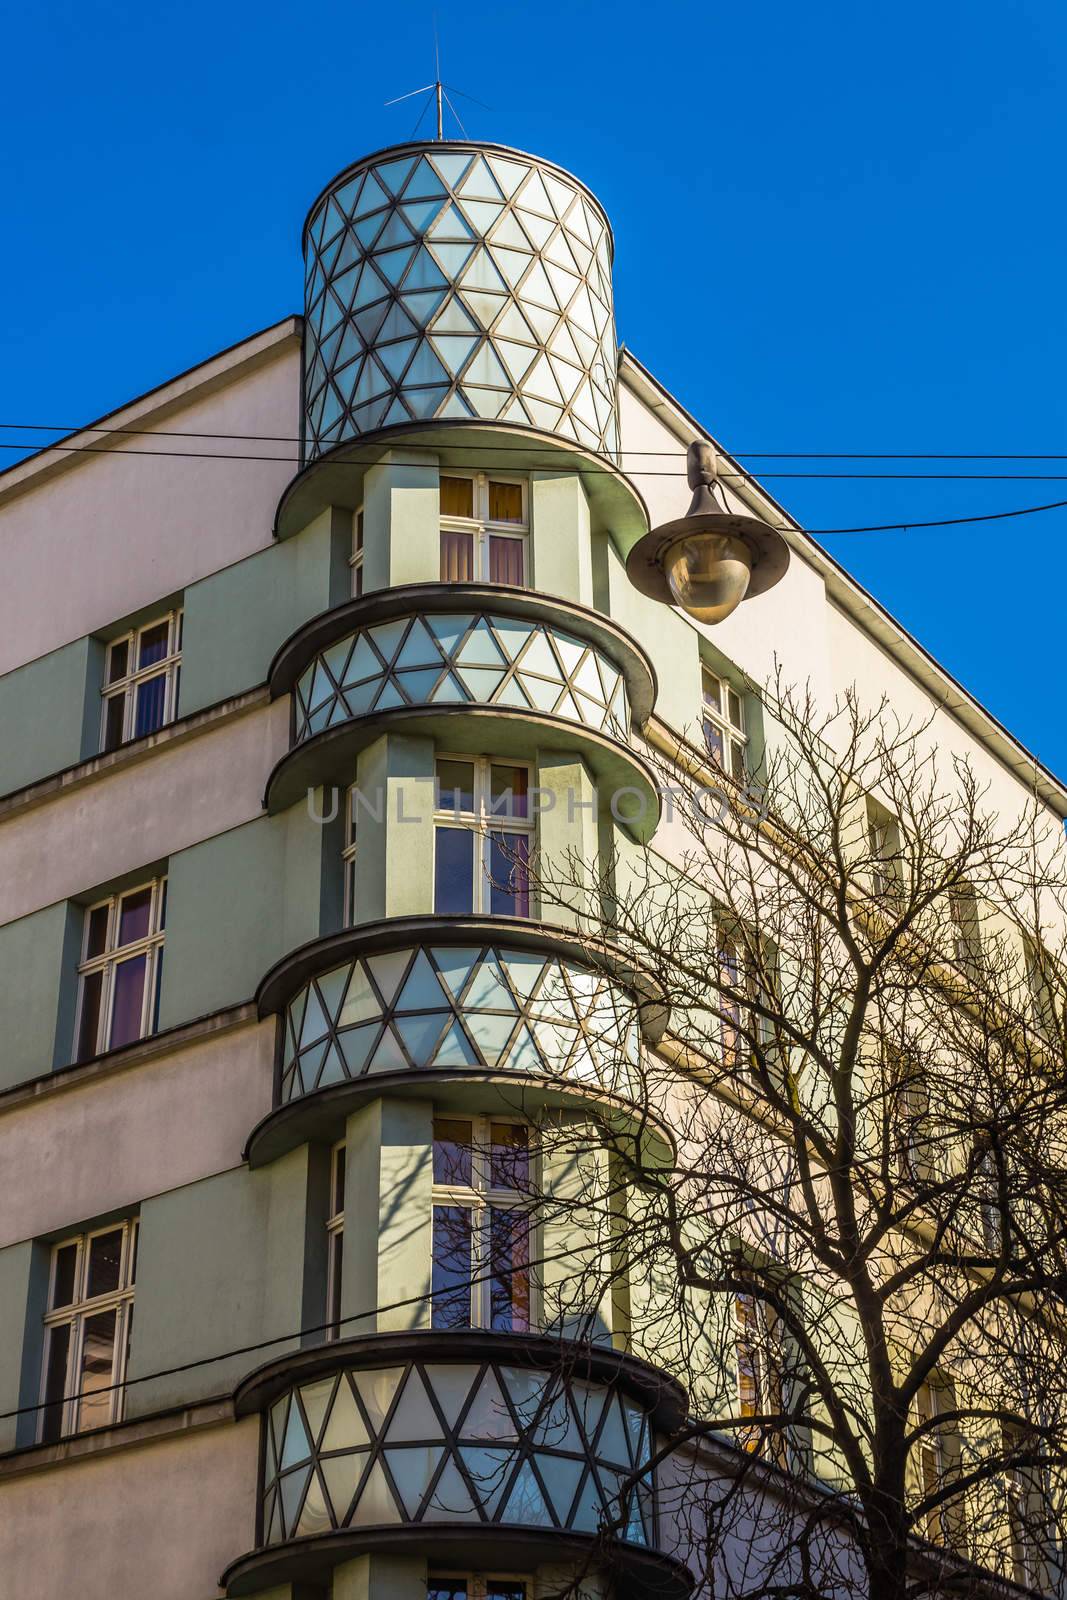 Tenement being an interesting example of modernism architectural style in Gliwice on February 08, 2014. Characteristic rounded corner is filled with milk glass, which is illuminated at night.